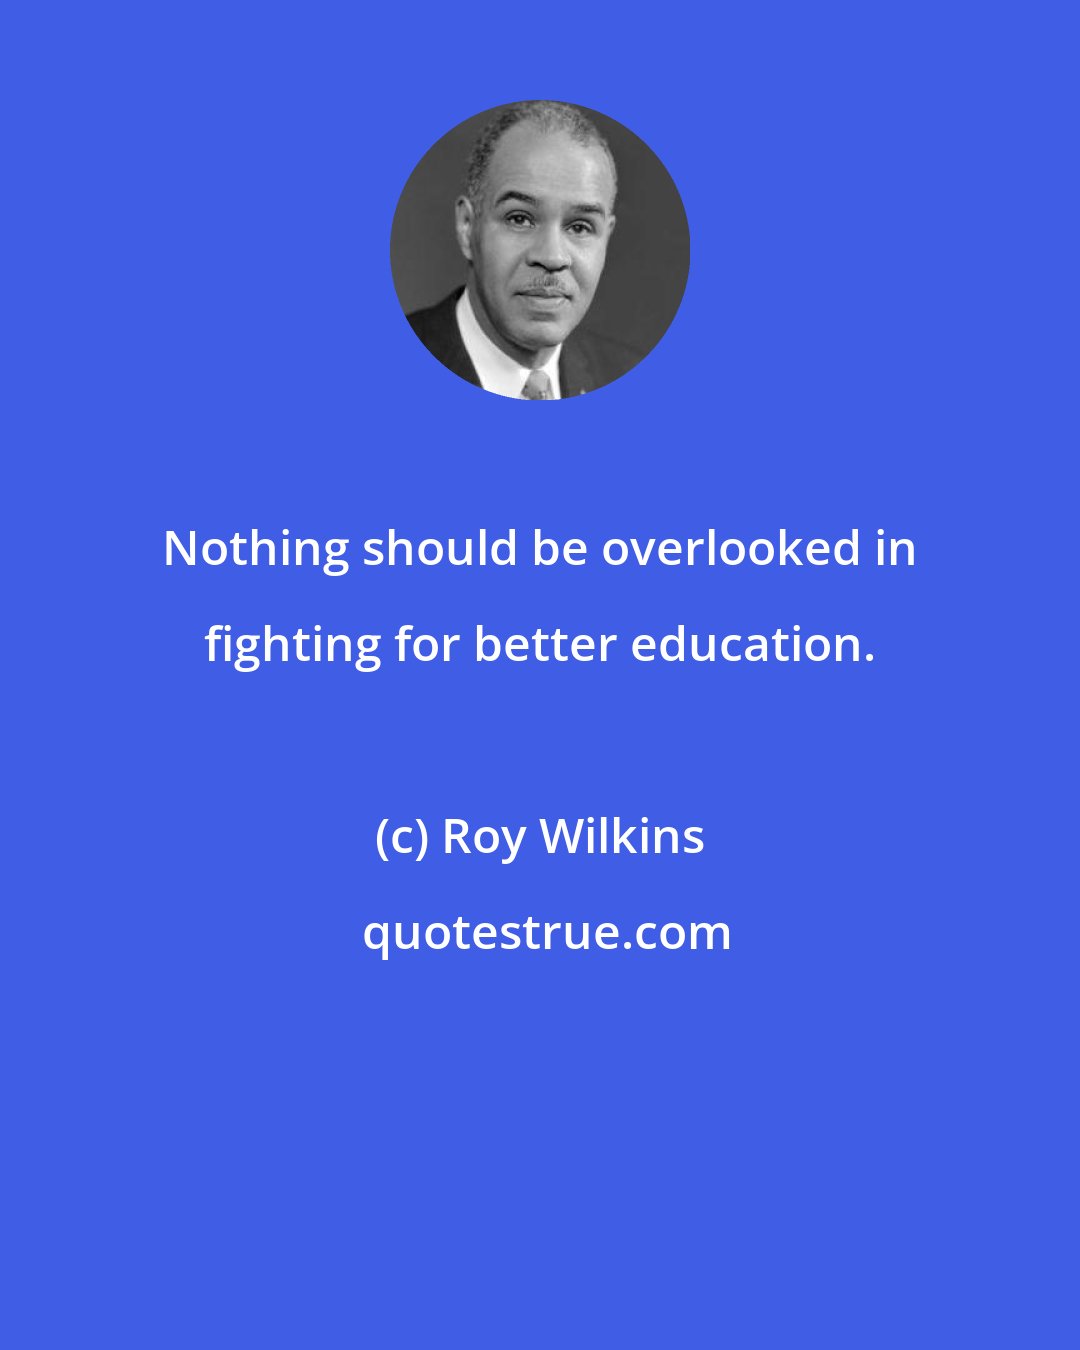 Roy Wilkins: Nothing should be overlooked in fighting for better education.